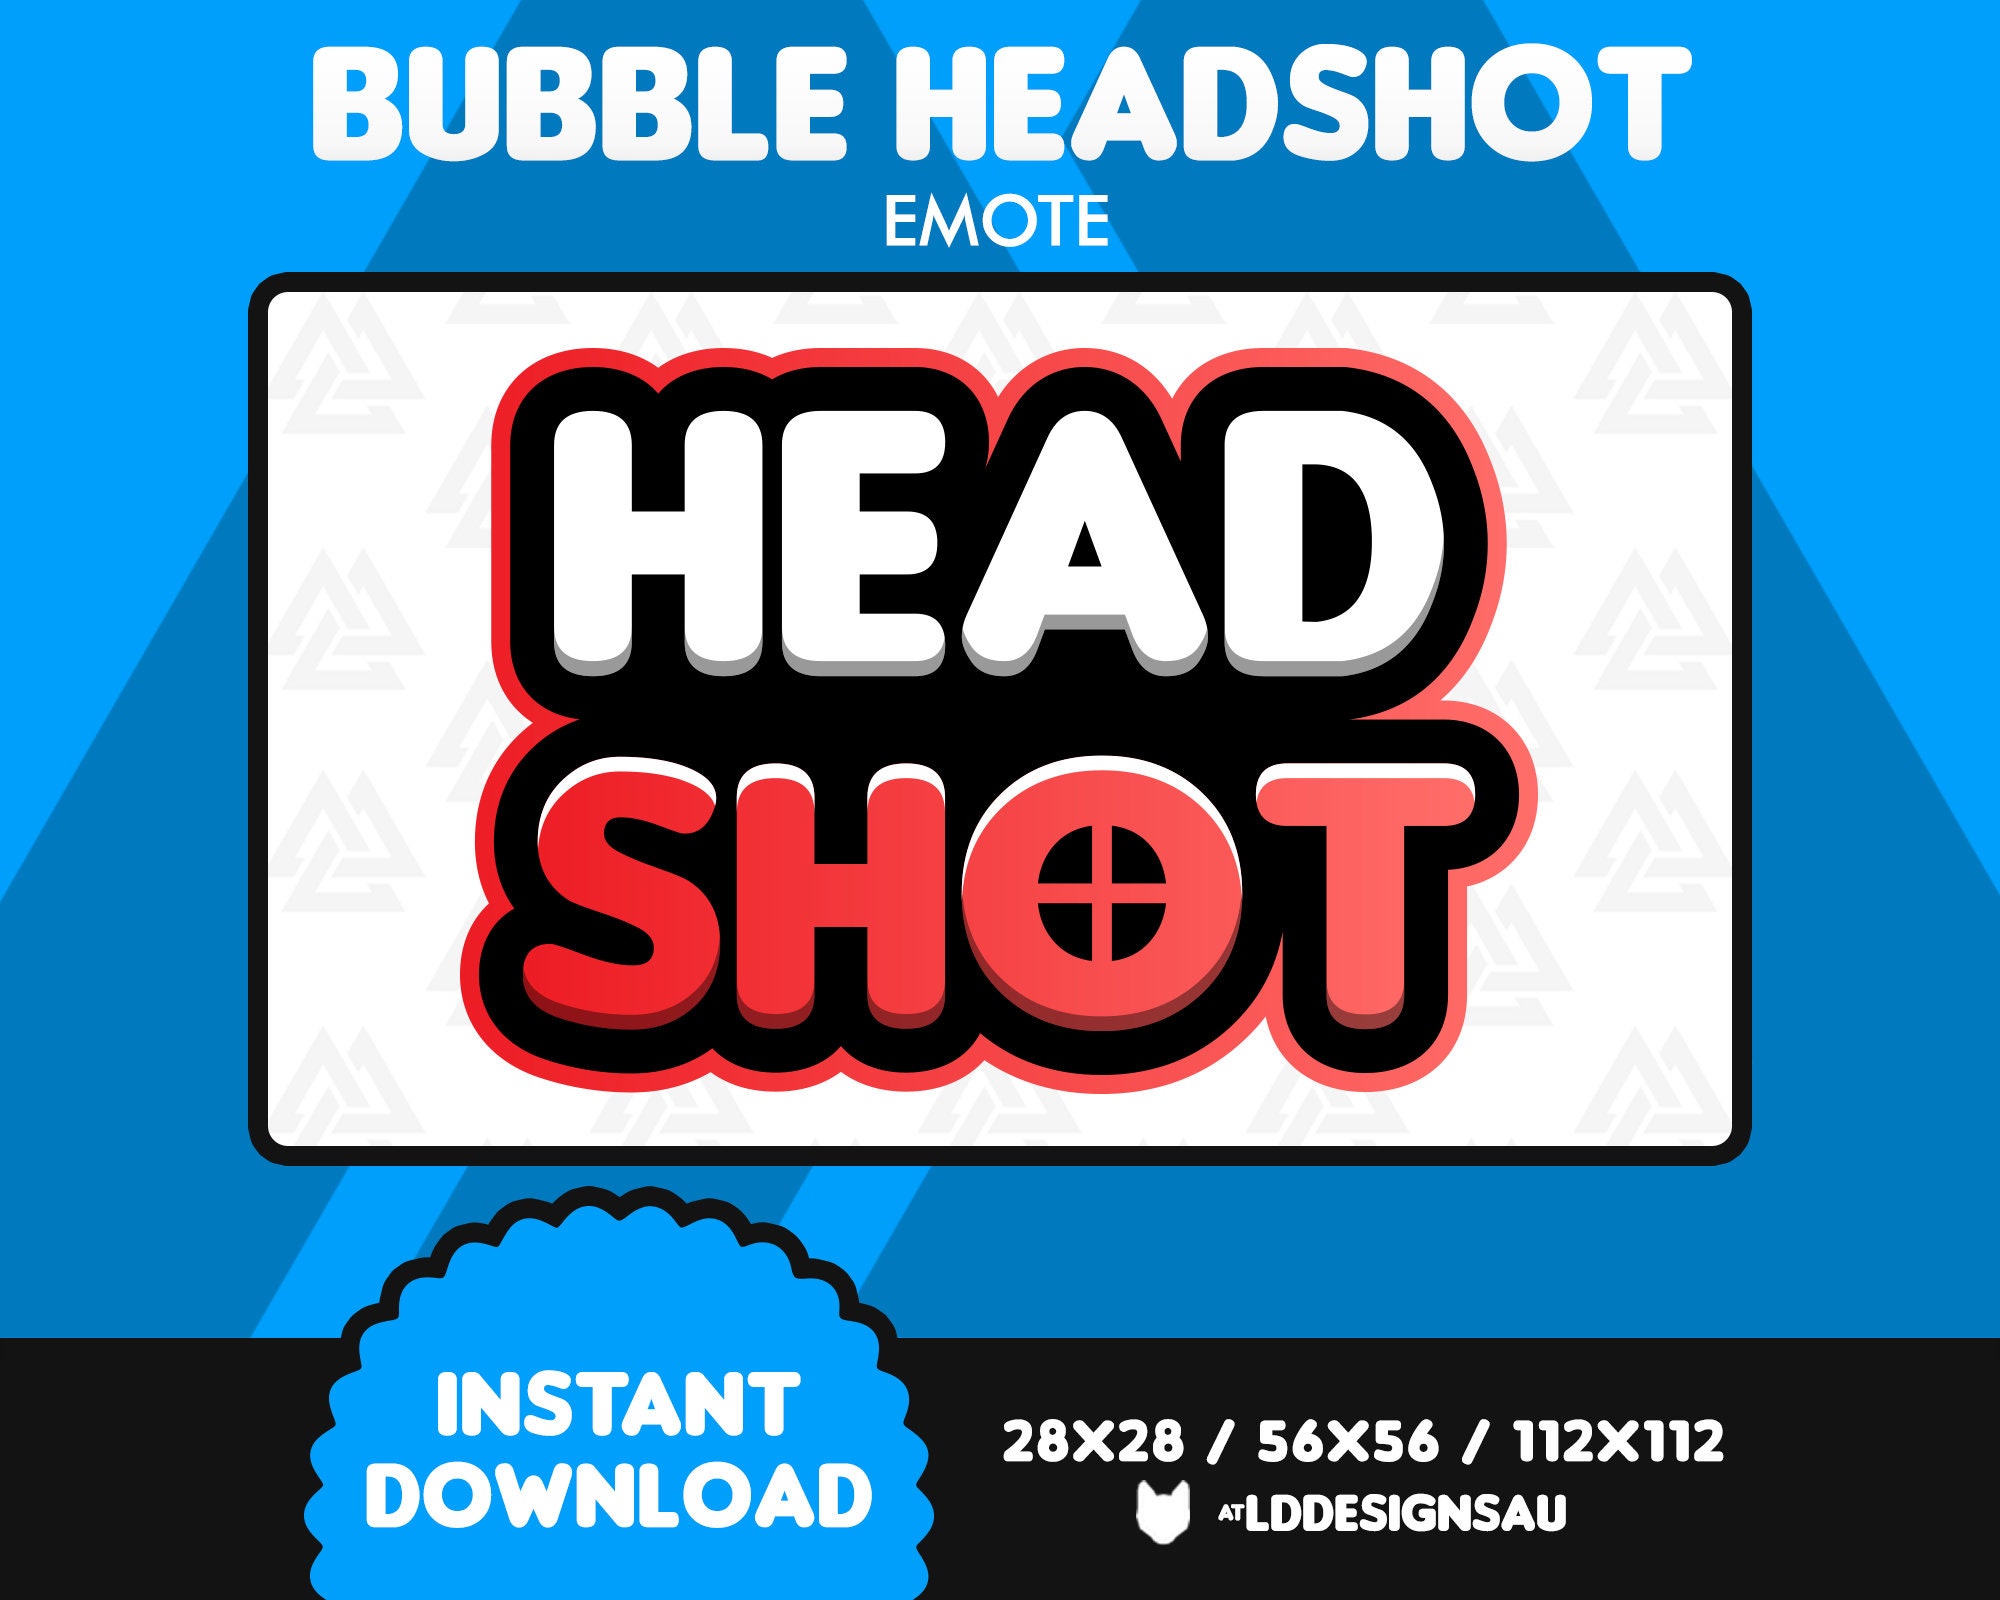 How to make emotes with bubble chat? - Scripting Support - Developer Forum